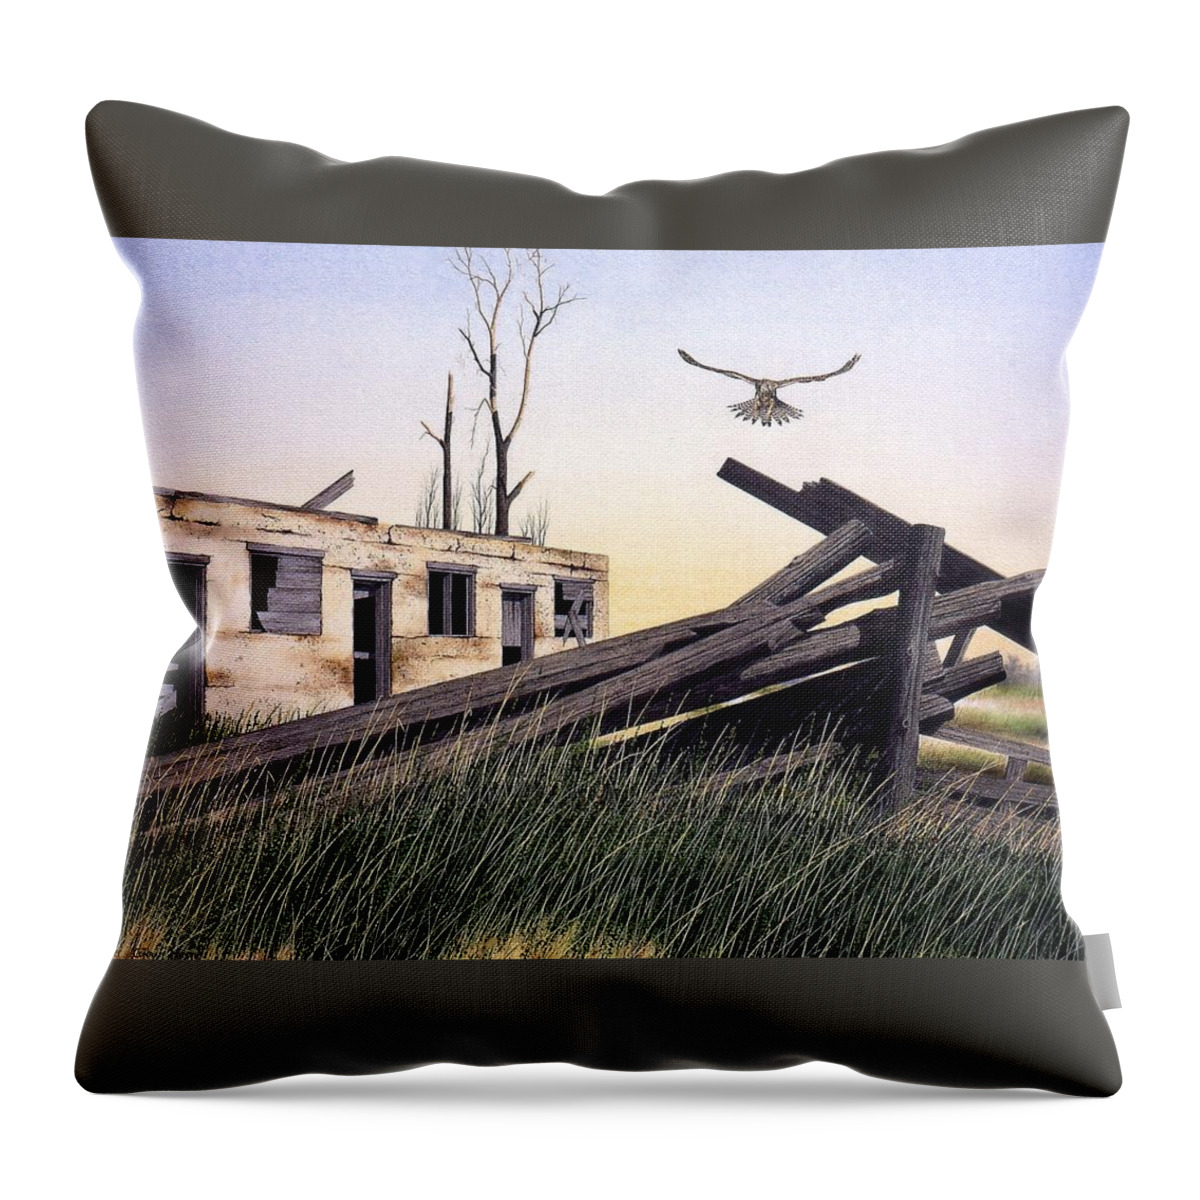 Summer Throw Pillow featuring the painting The Hawk by Conrad Mieschke